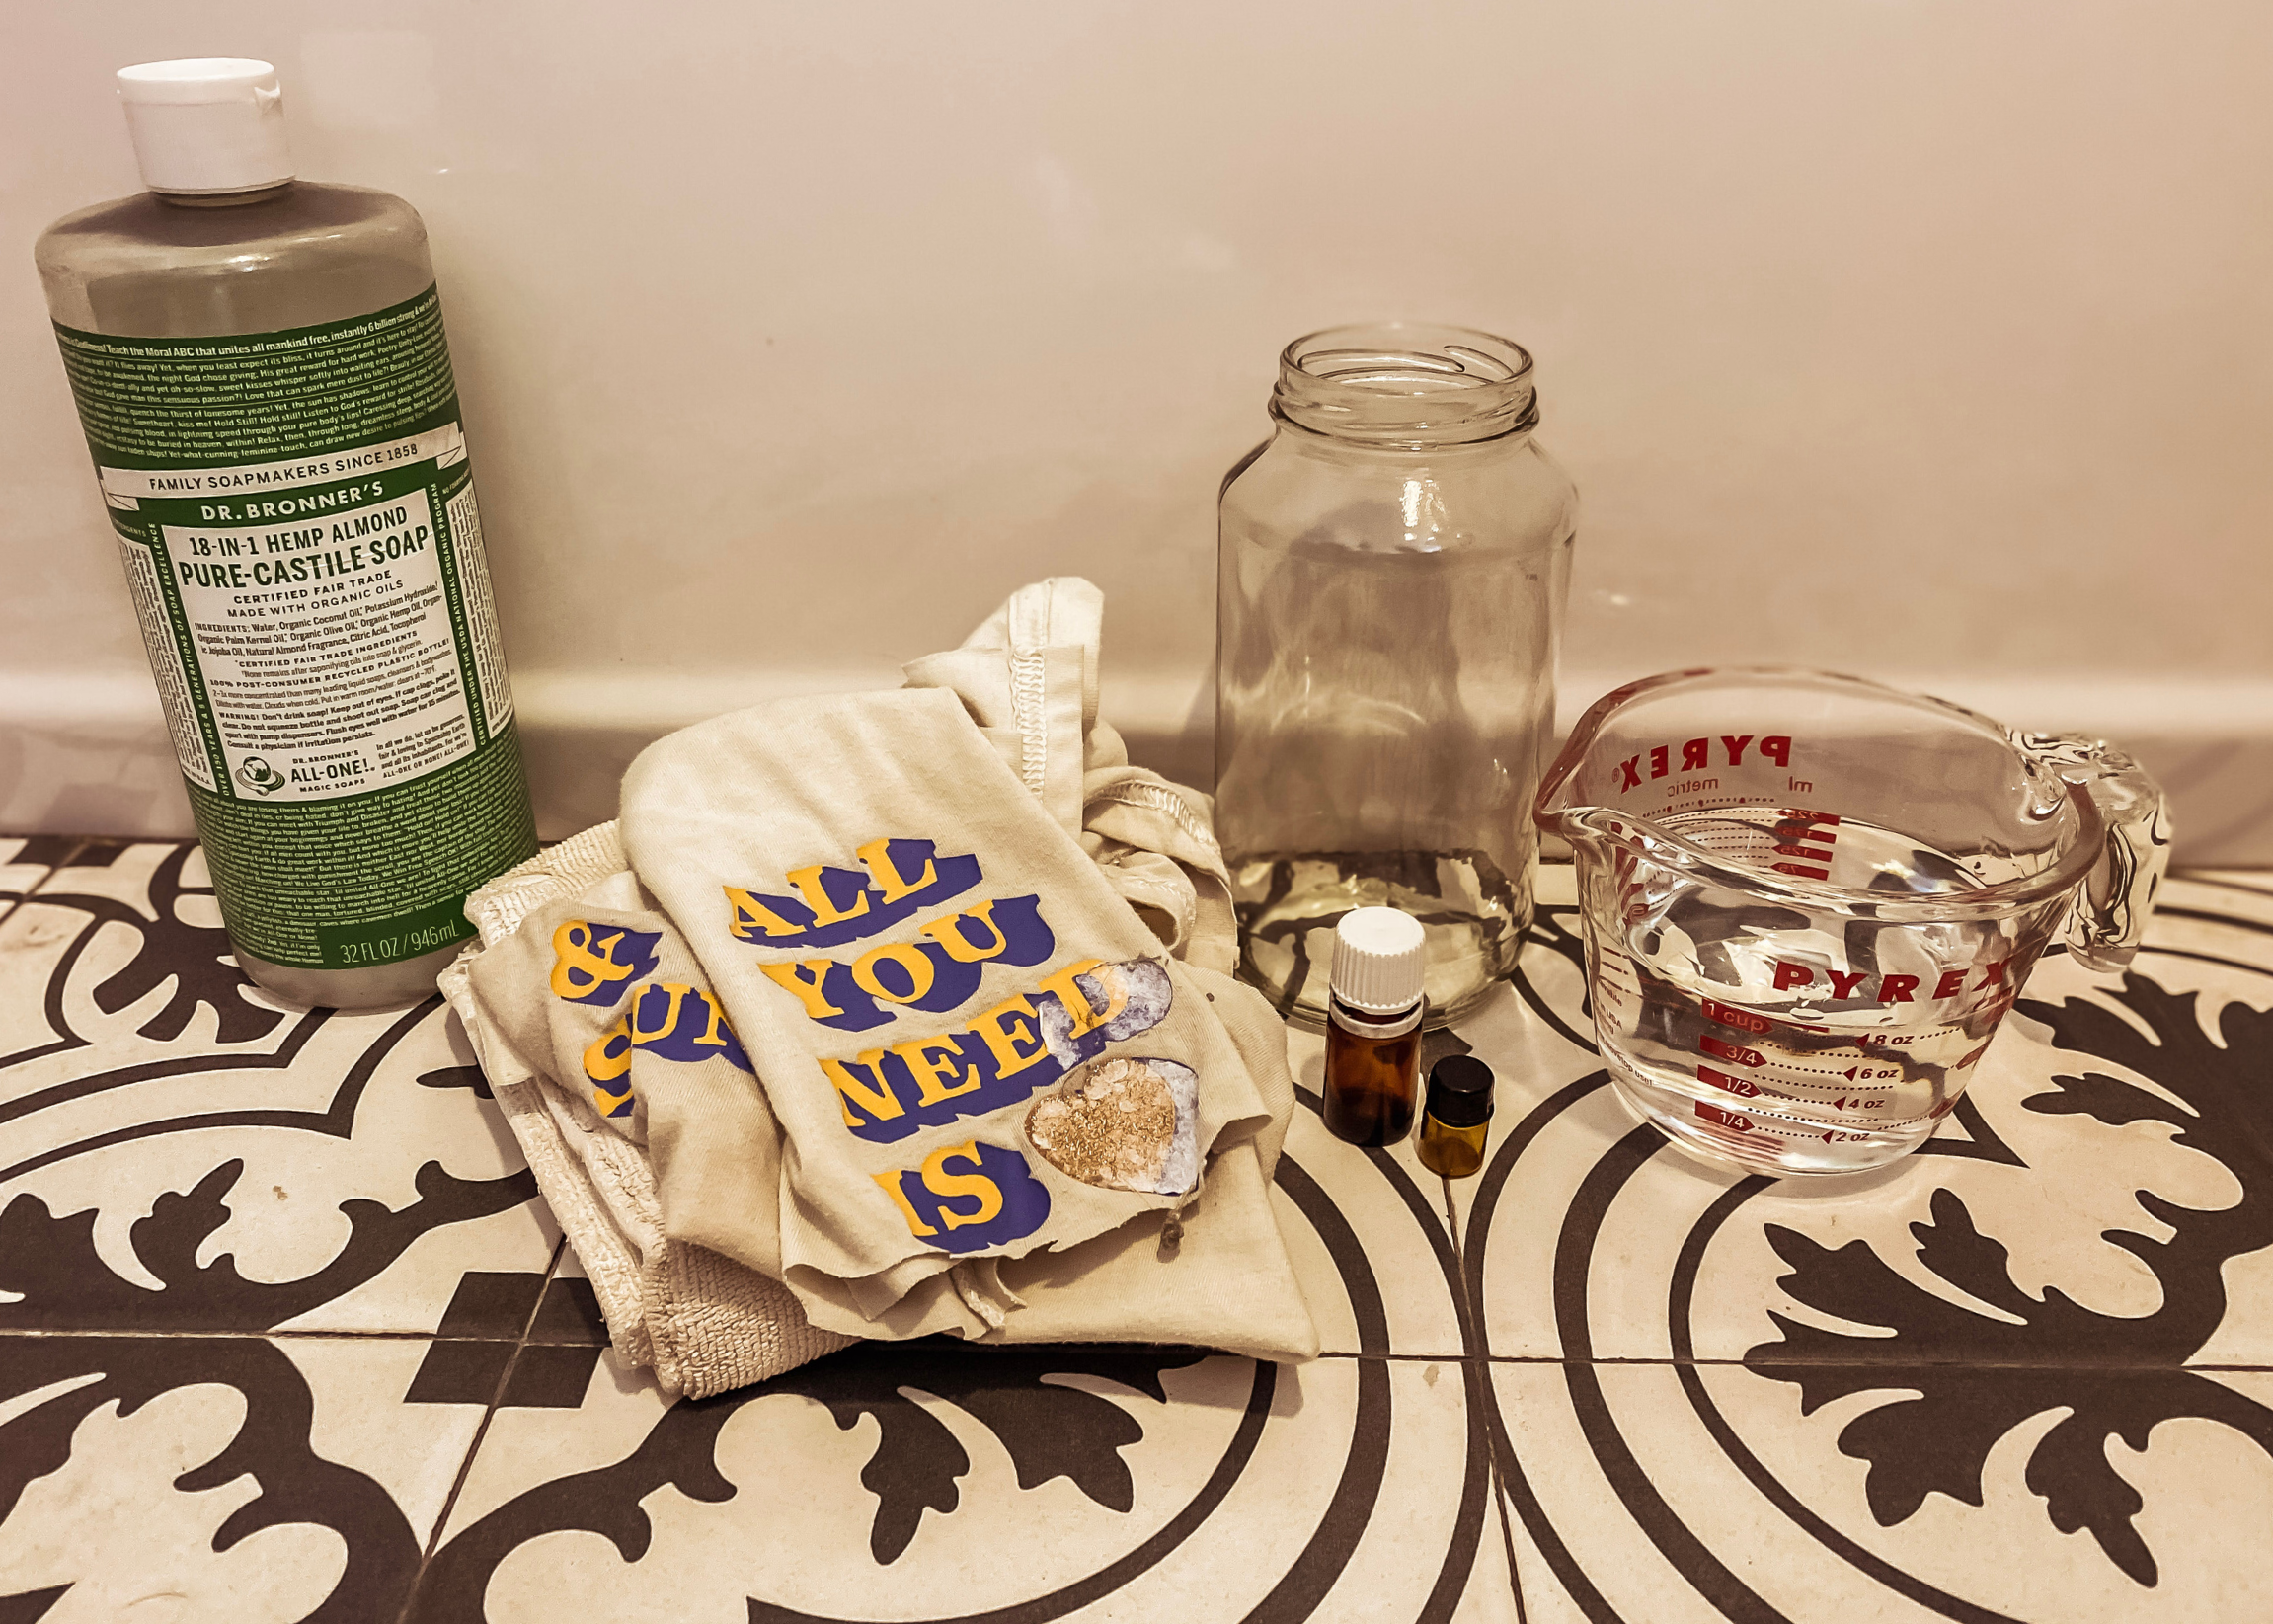 DIY Non-Toxic Disinfectant Wipes: We've got kids, so we've got messes. And with all the germs spreading around, I thought I'd make some non-toxic disinfectant wipes. Here's how.